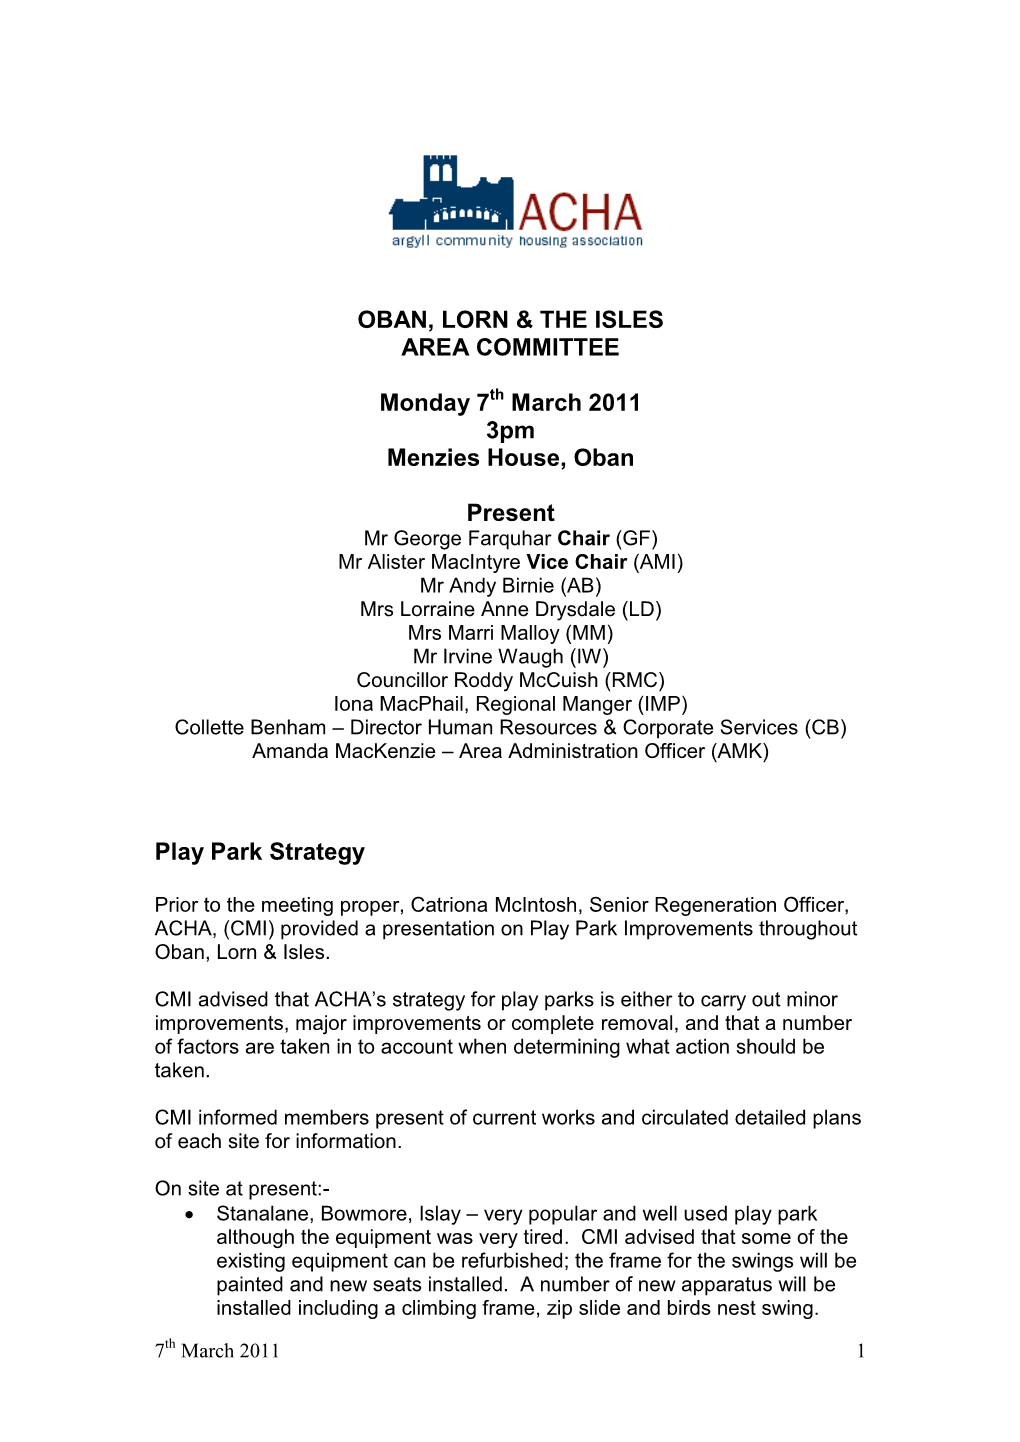 OBAN, LORN & the ISLES AREA COMMITTEE Monday 7